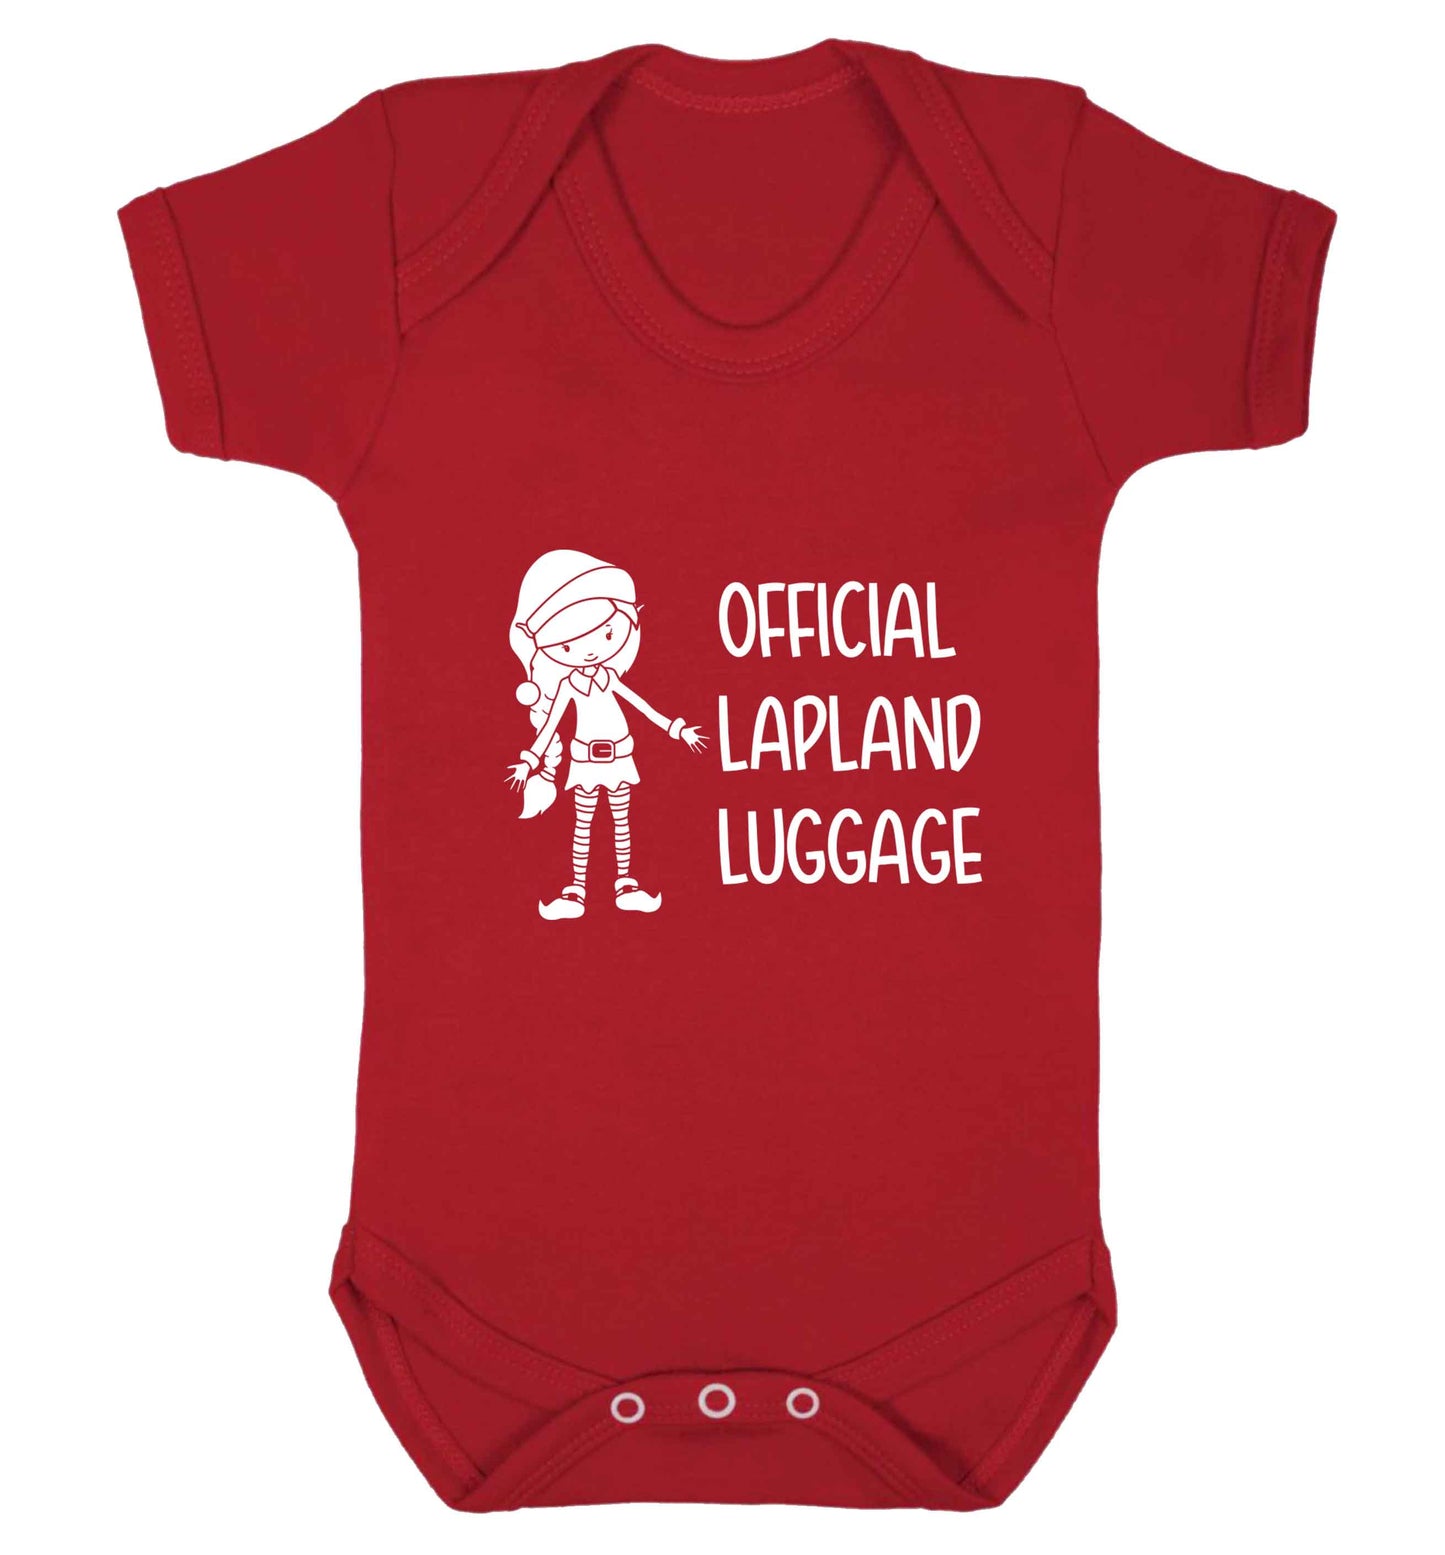 Official lapland luggage - Elf snowflake baby vest red 18-24 months